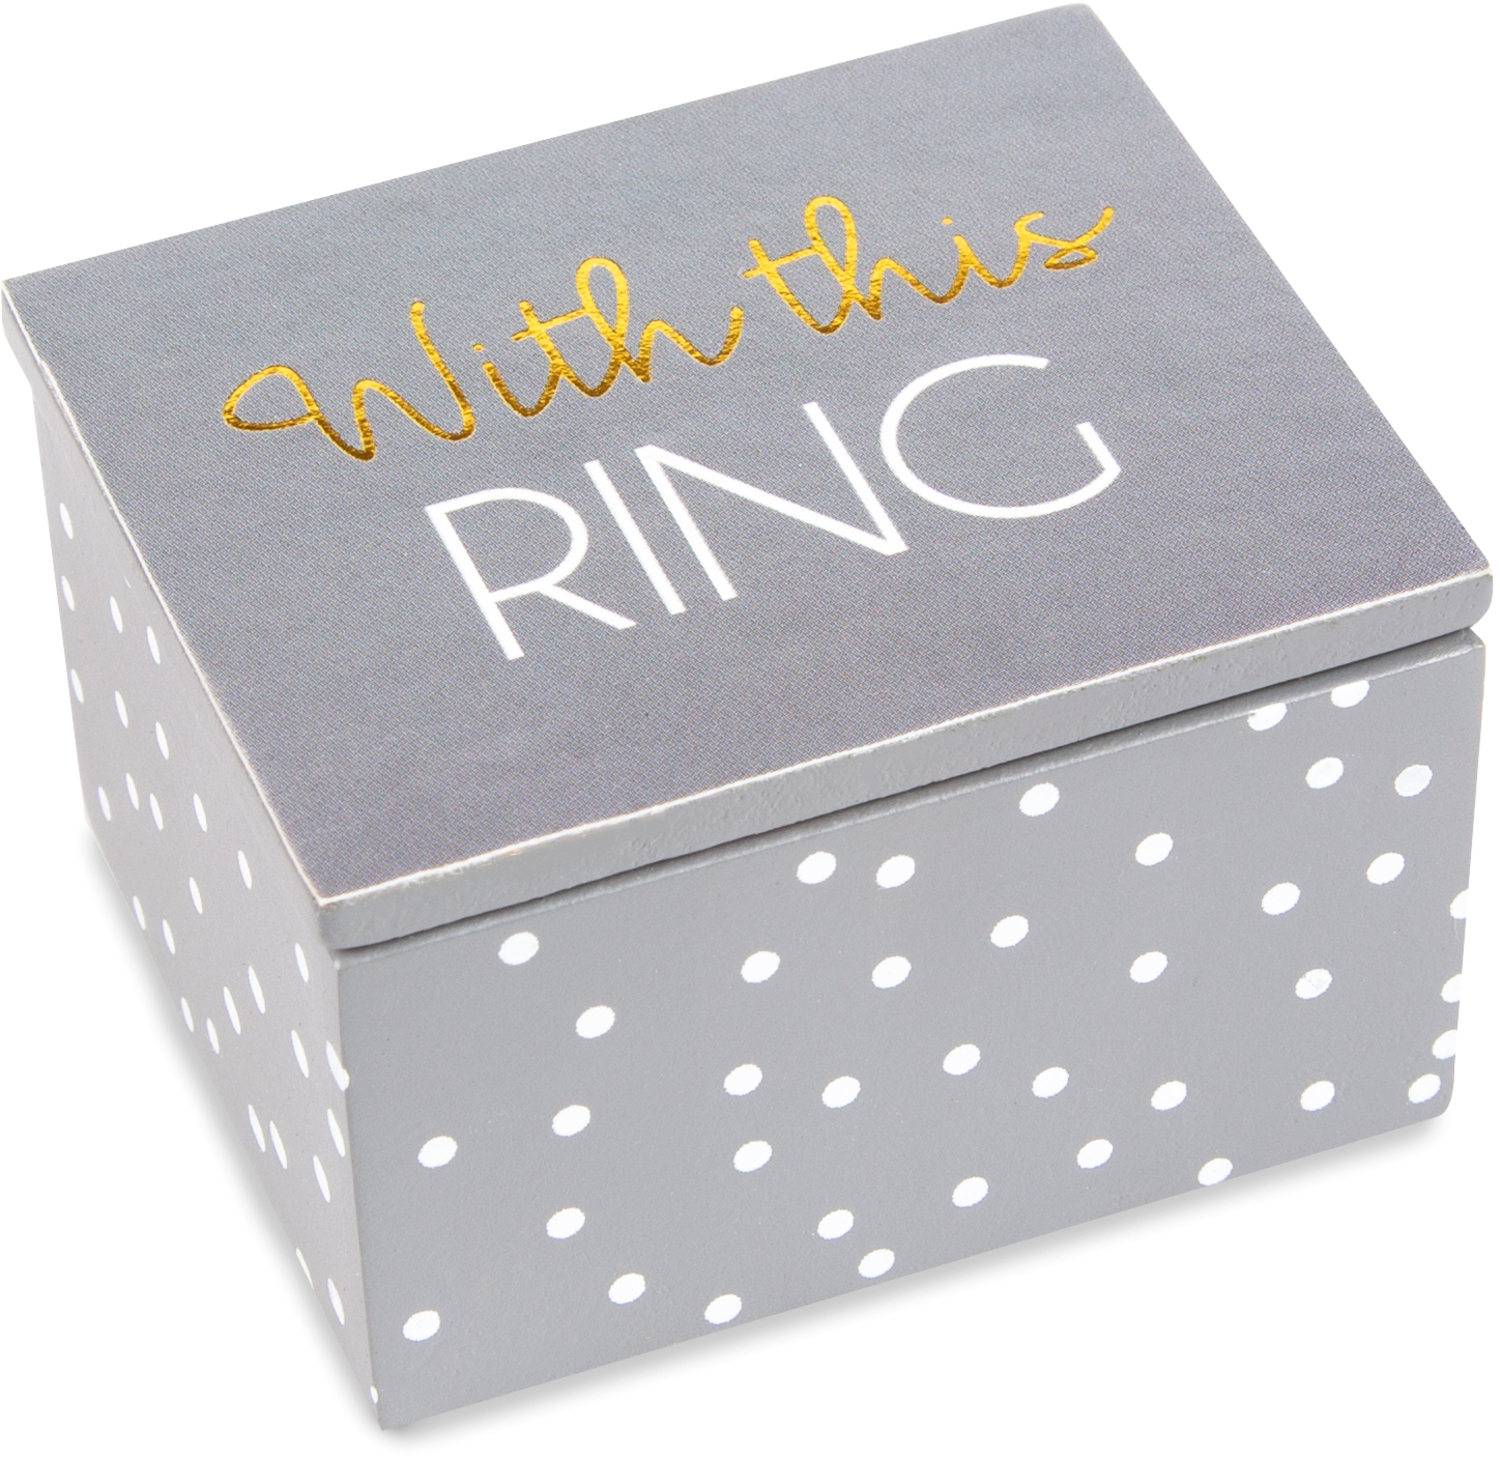 Ring by Happy Occasions - Ring - 2.25" x 2" x 1.5" MDF Keepsake Box